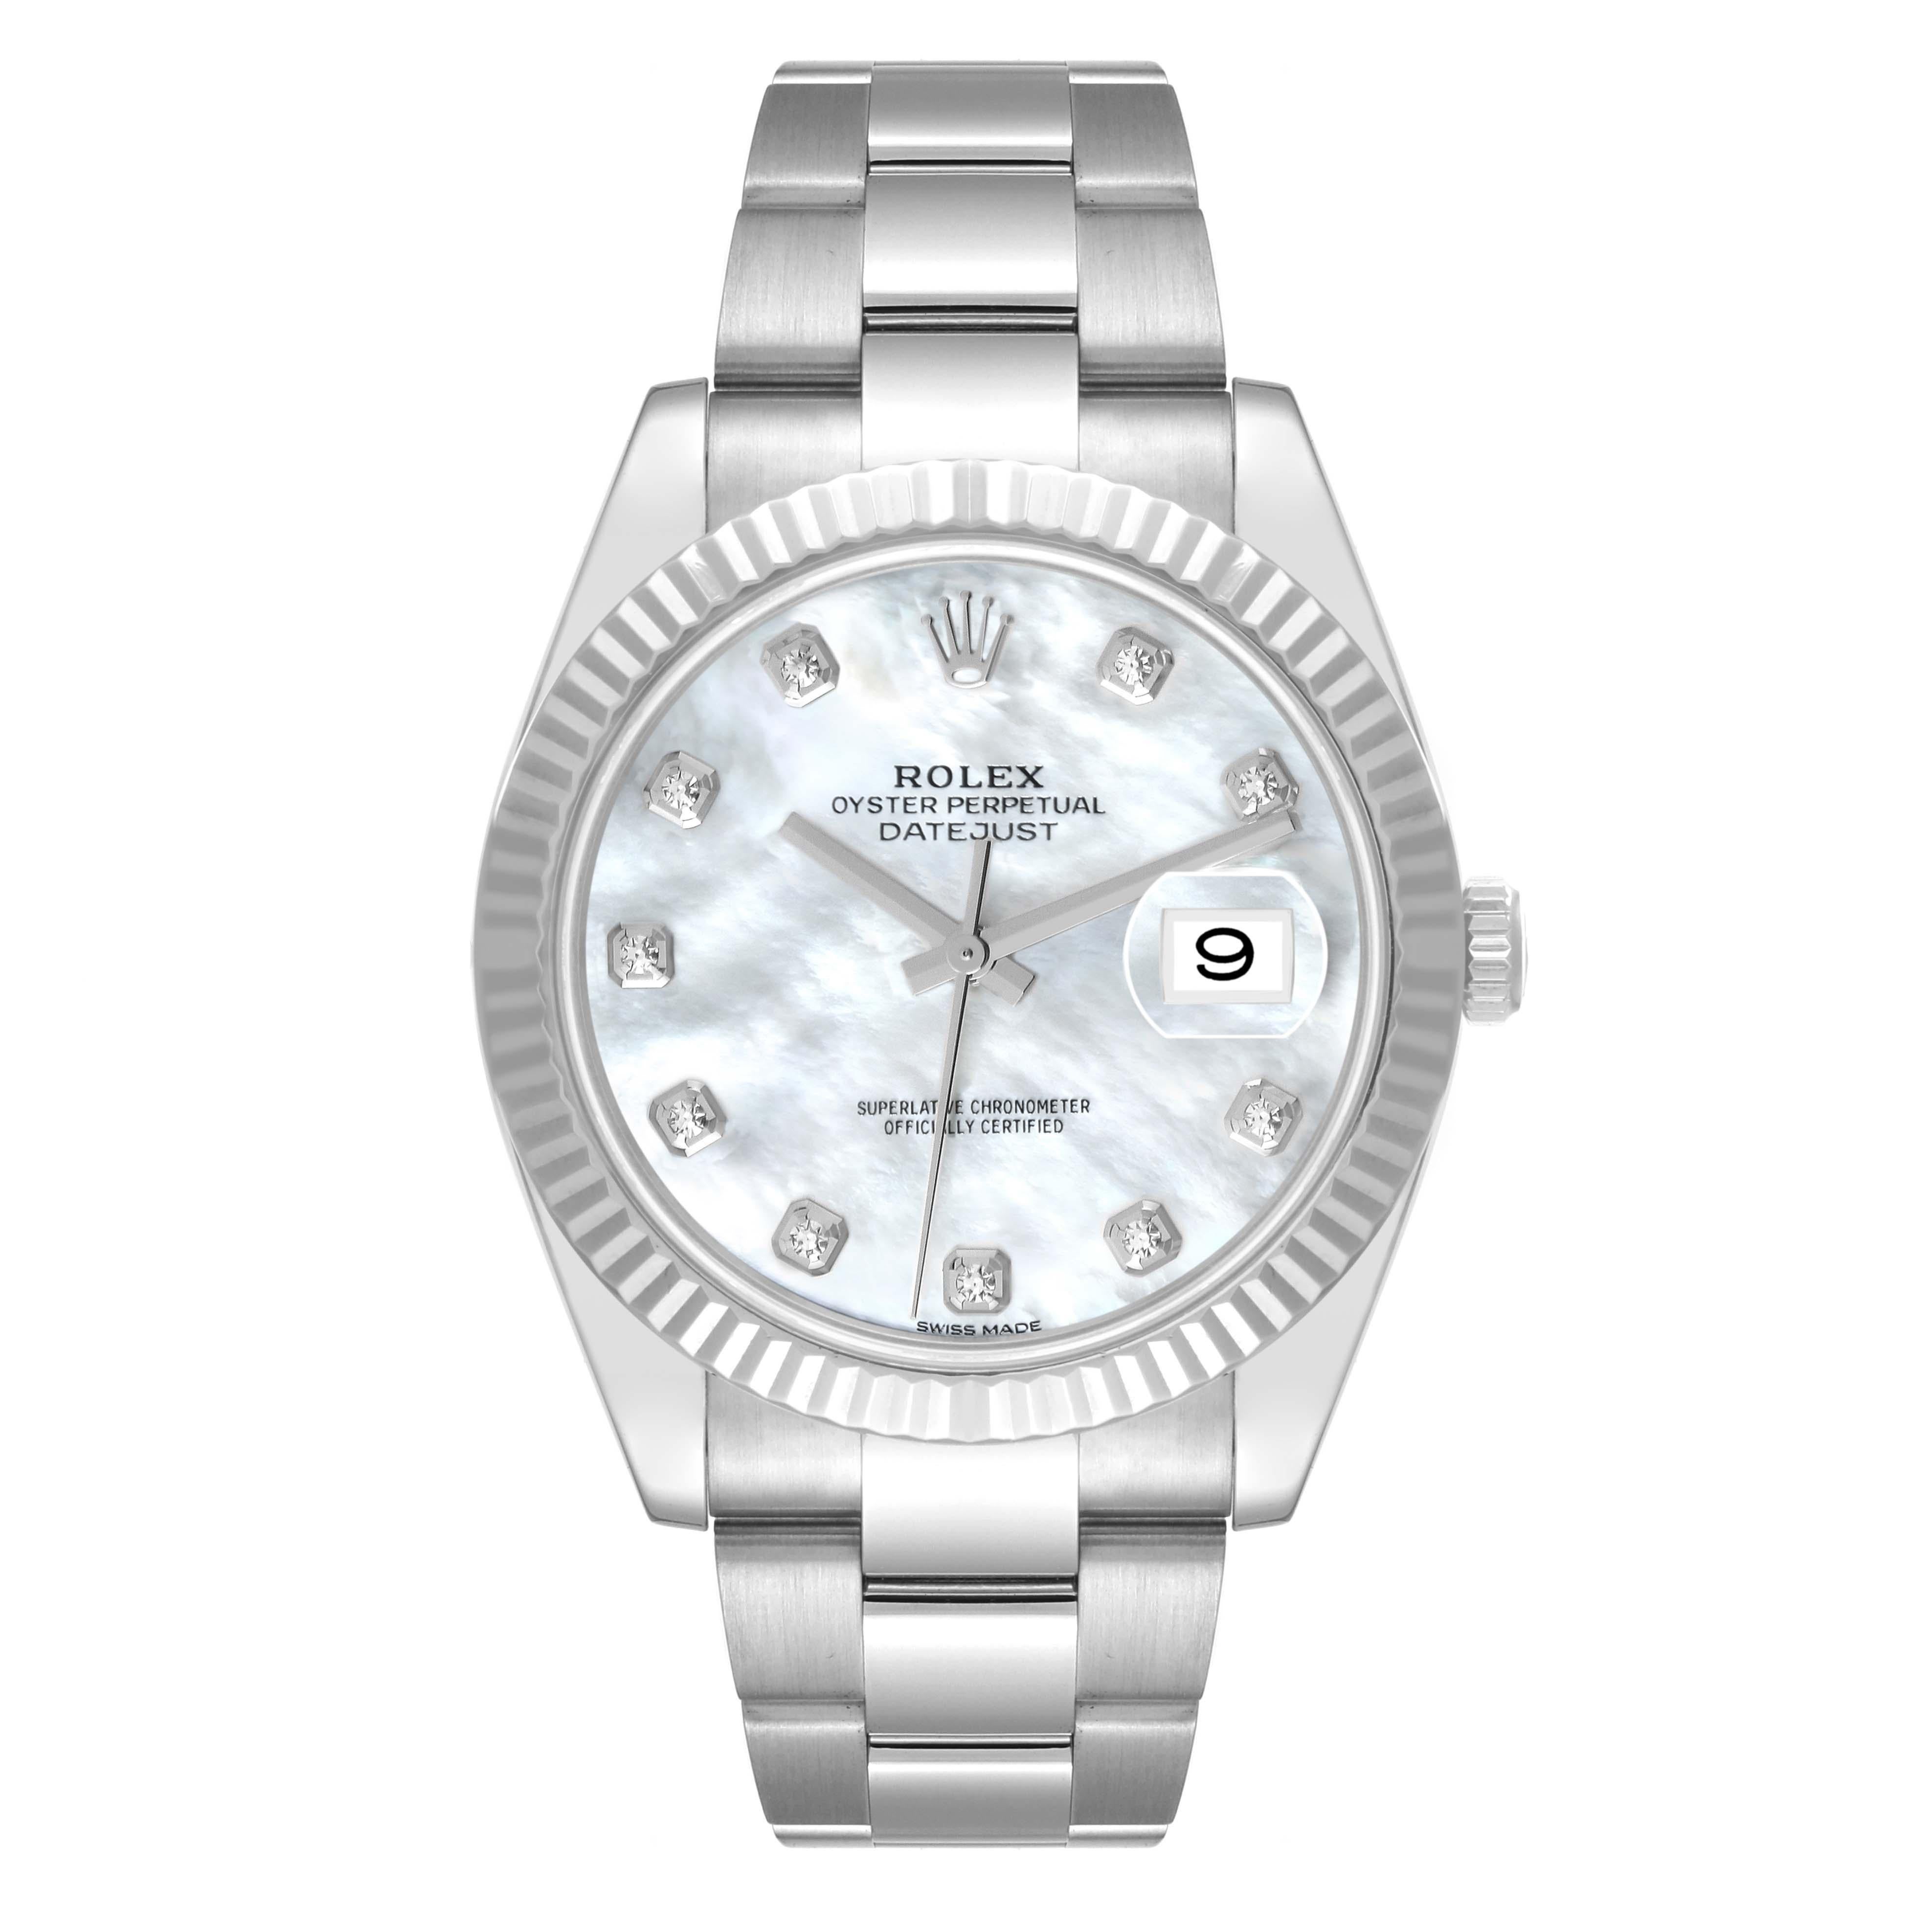 Rolex Datejust 41 Steel White Gold Mother Of Pearl Diamond Dial Mens Watch 126334. Officially certified chronometer automatic self-winding movement. Stainless steel case 41 mm in diameter. Rolex logo on the crown. 18K white gold fluted bezel.